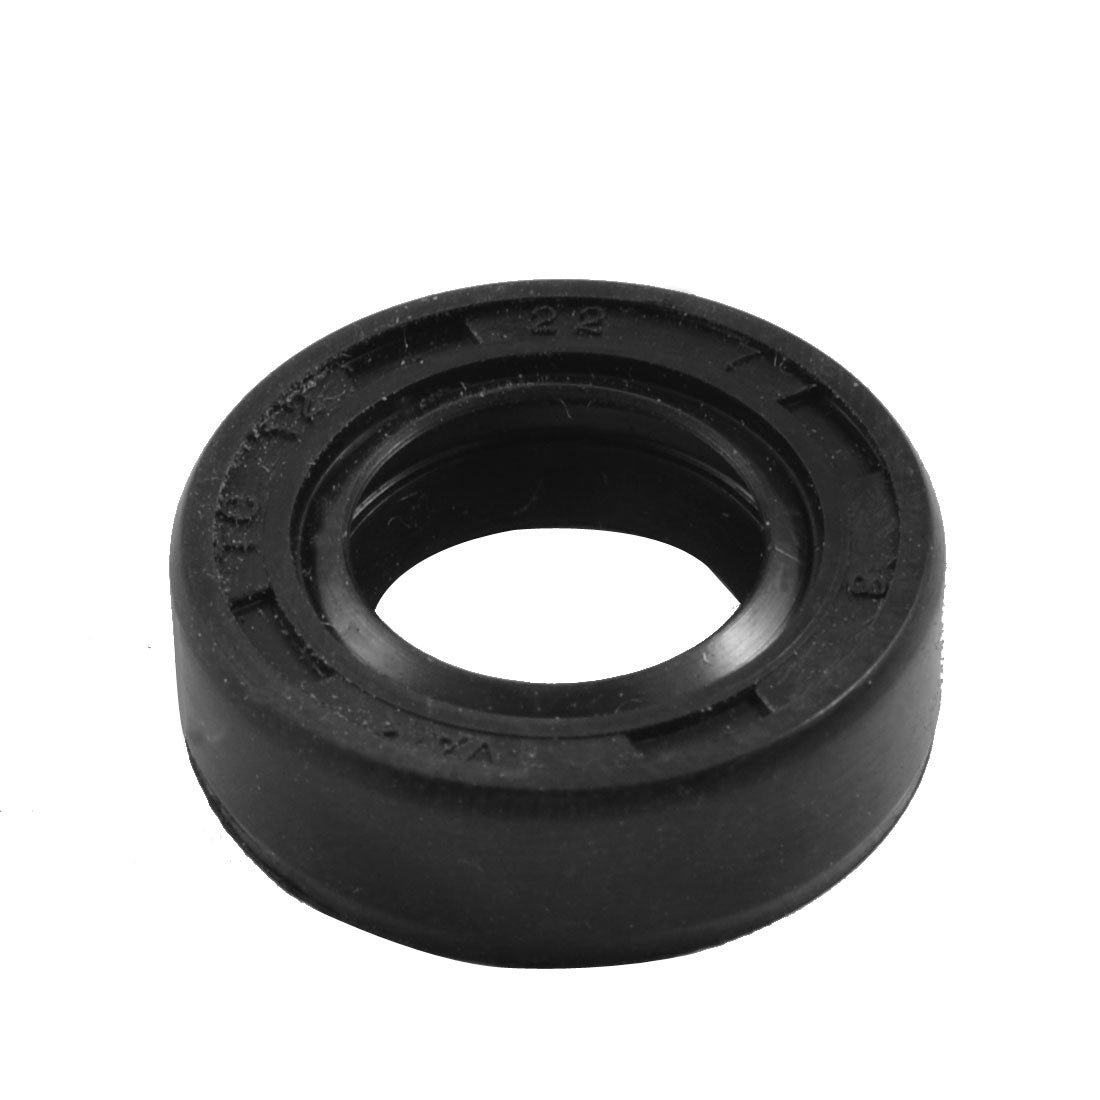 uxcell Uxcell 12mm x 22mm x 7mm Metric Double Lipped Oil Shaft Seal TC